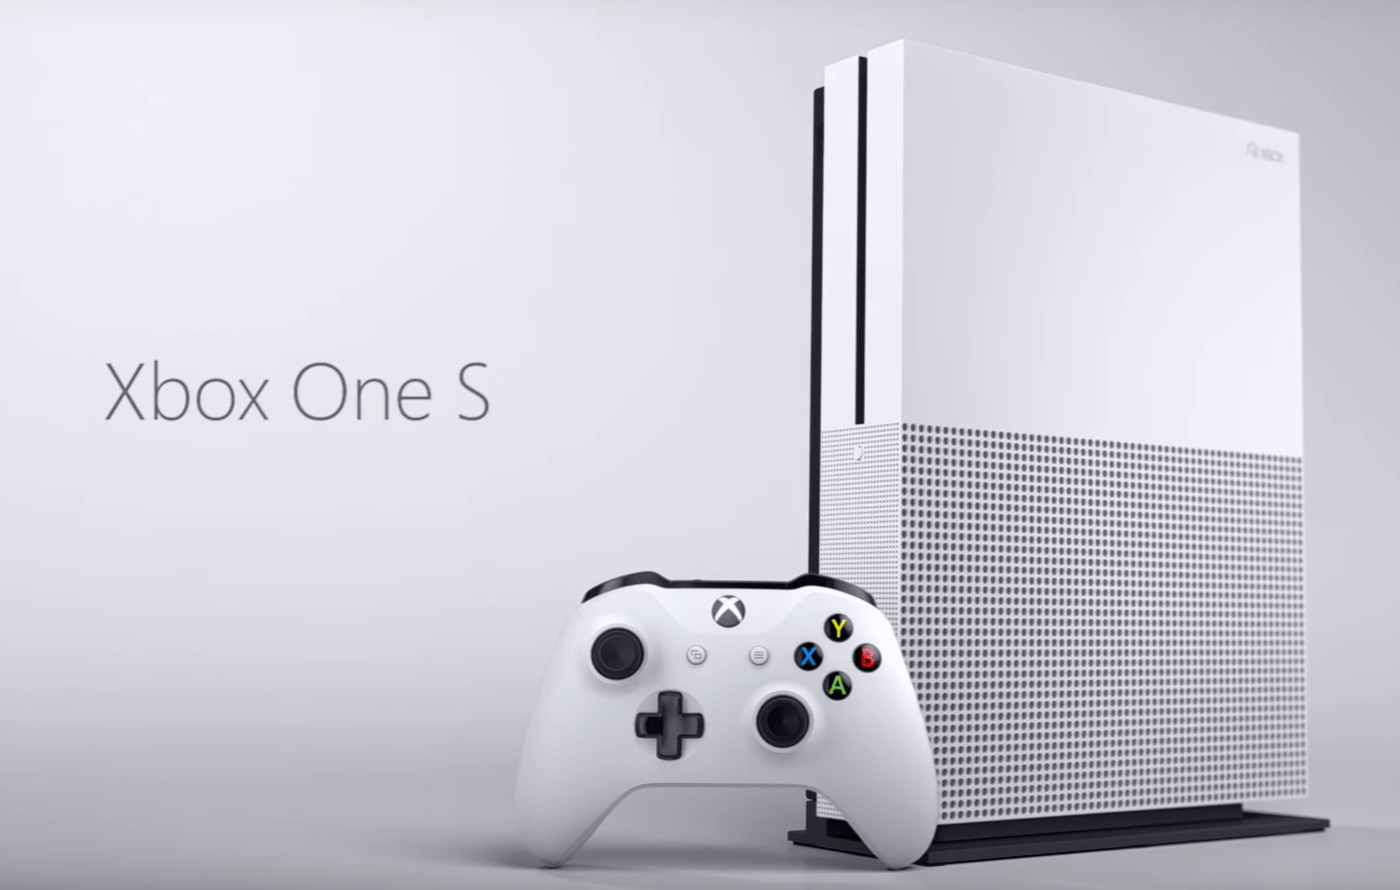 Xbox One S is launched - Microsoft News Centre UK